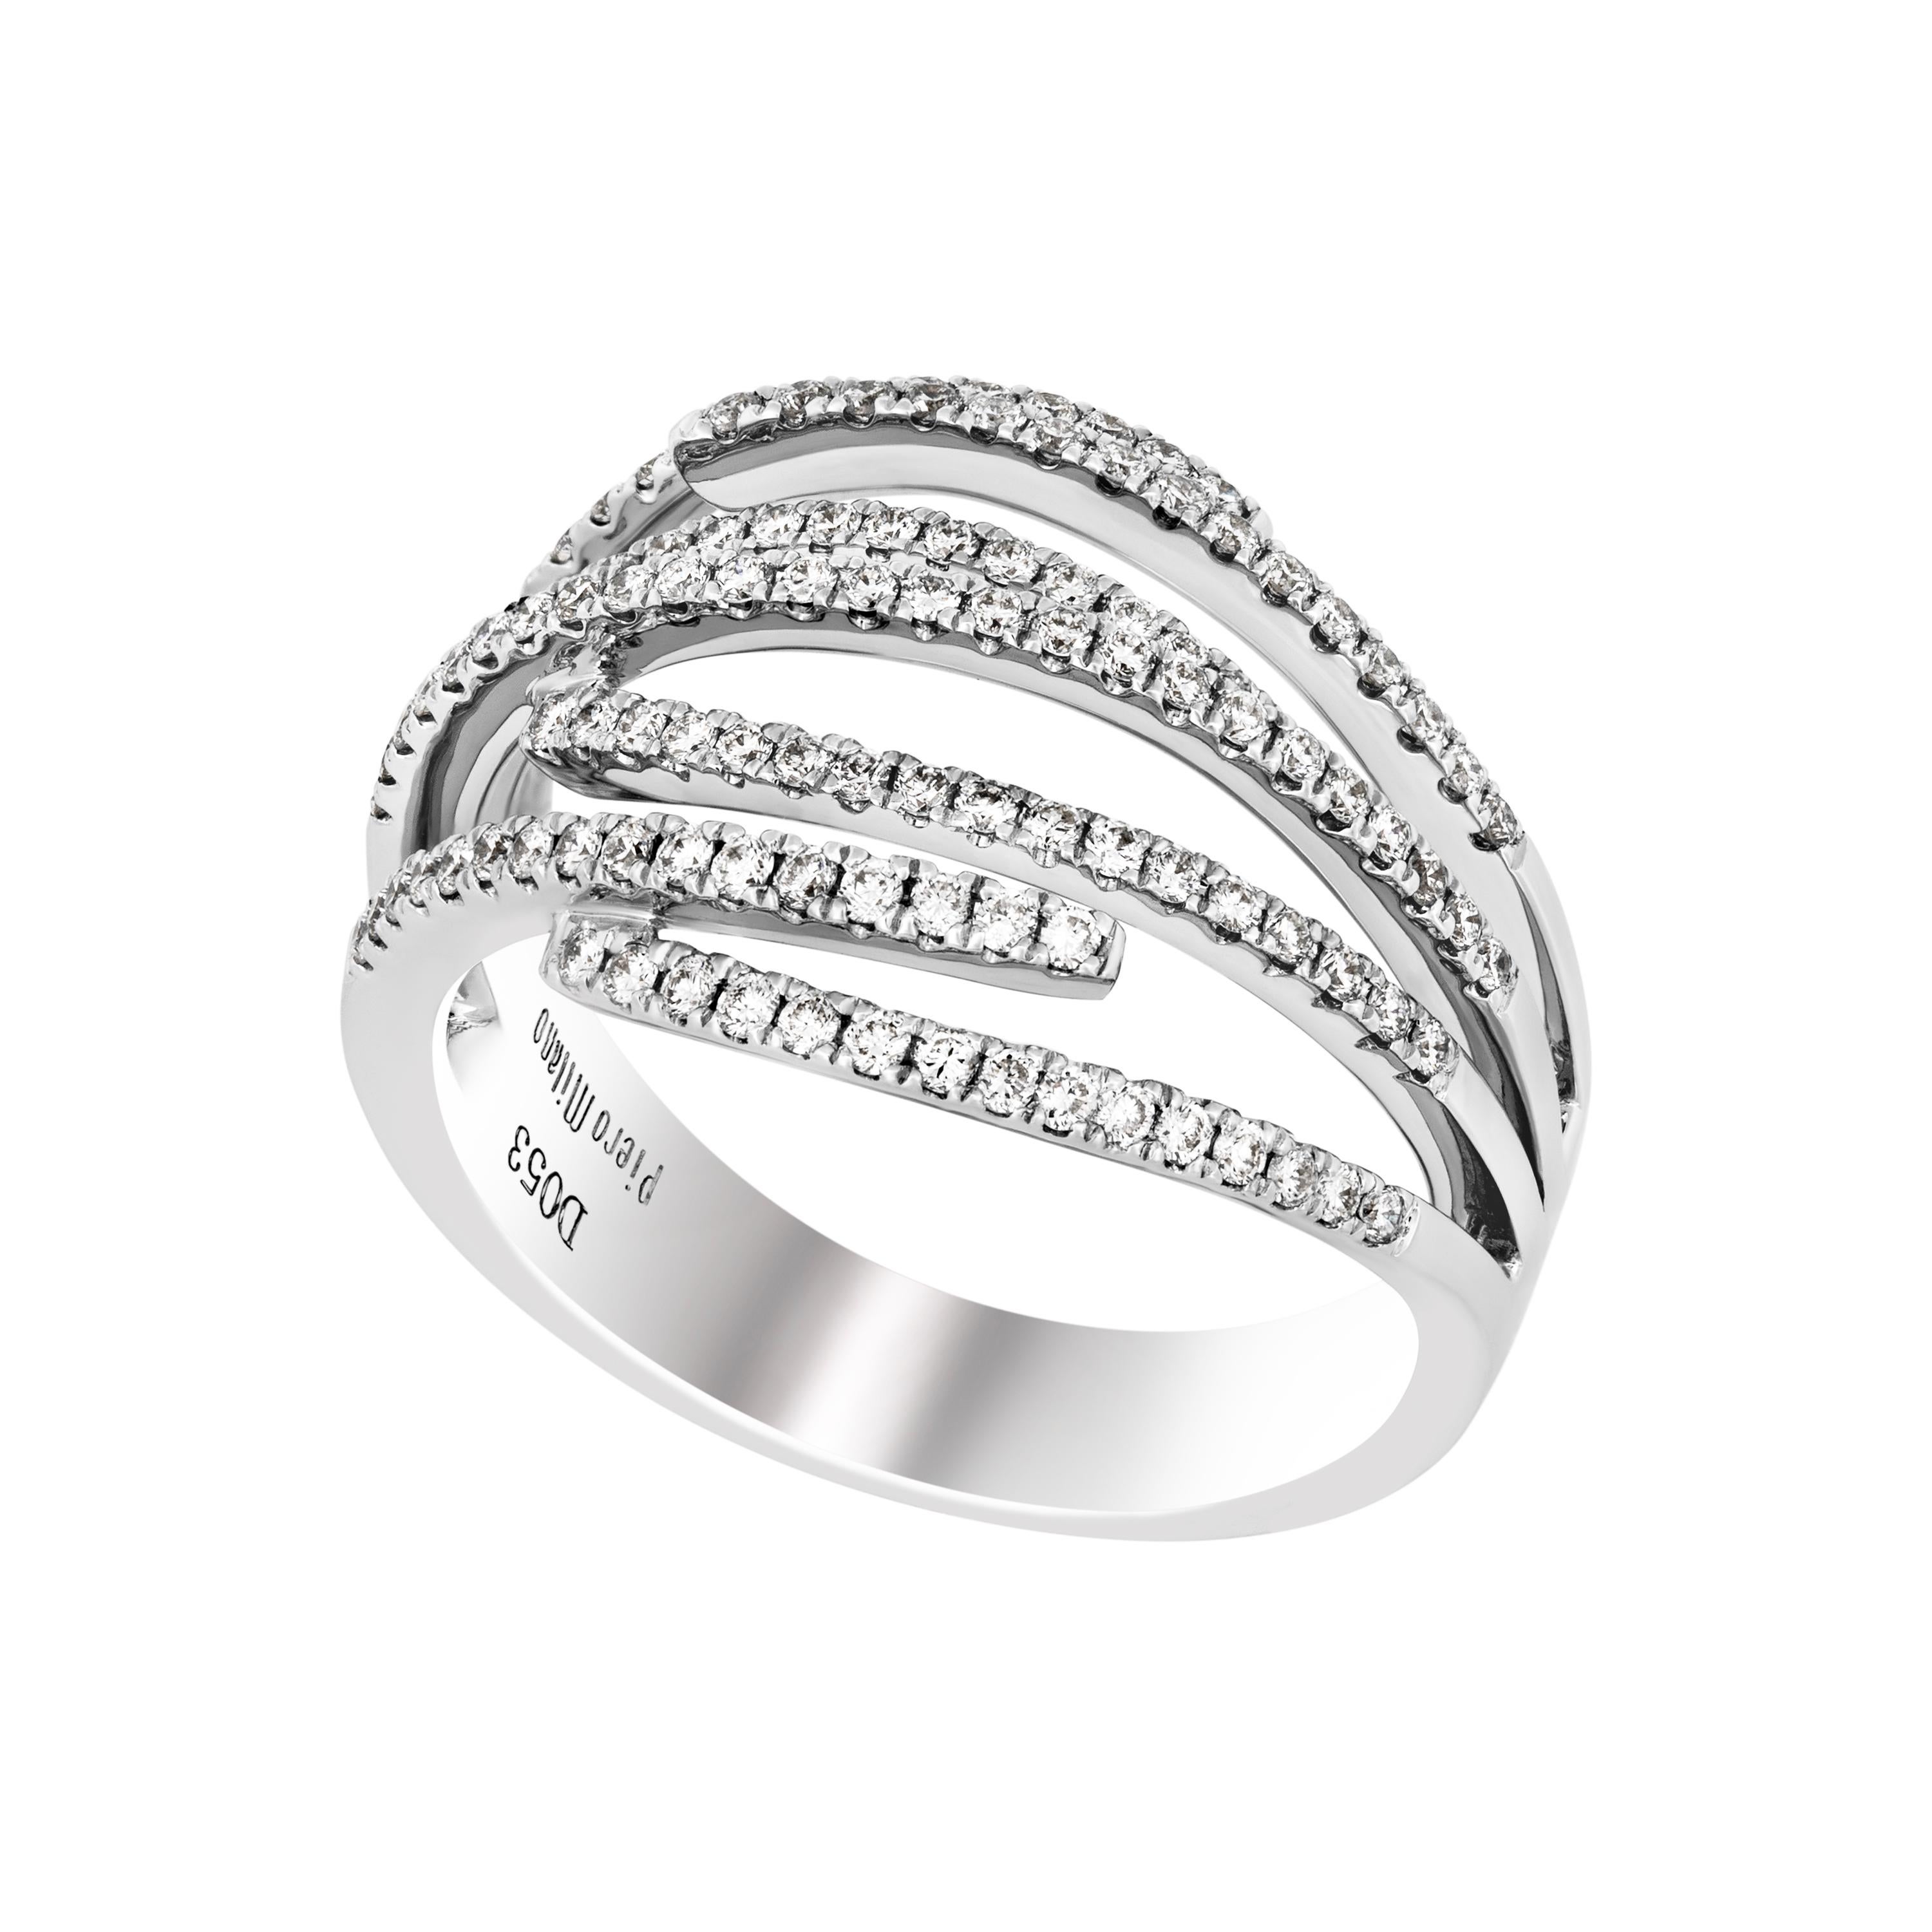 This charming Piero Milano 18K White Gold Highway Ring features a dazzling sparkle cast from seven layers of French pave diamonds 0.53ct. tw. lining white gold arches. The ring size is 6.75 (53.8). The Band Width is 14.1mm. The Weight is 6.6g.